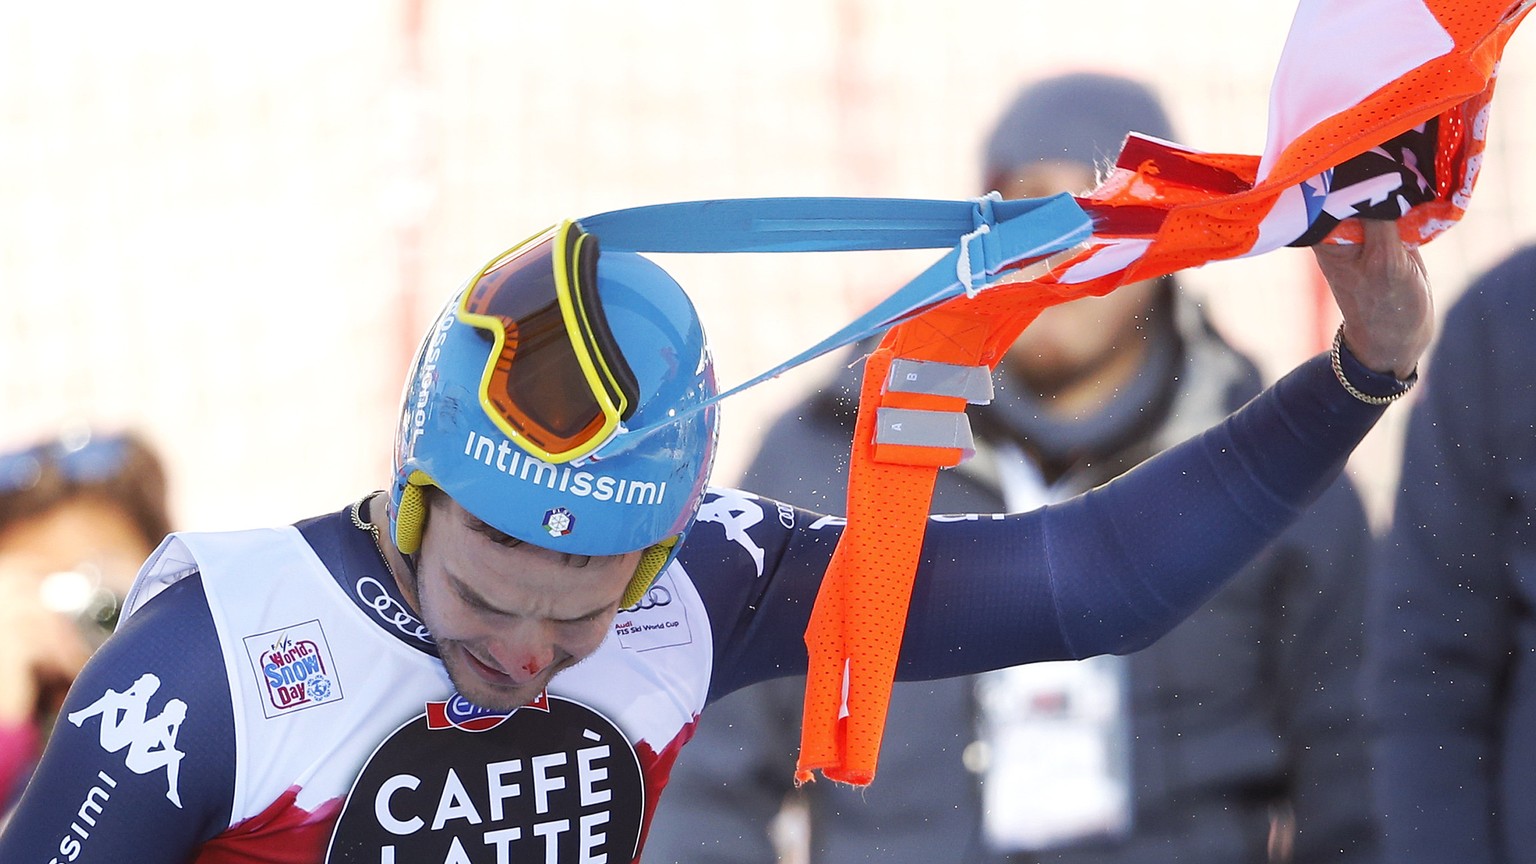 Christof Innerhofer of Italy removes part of a gate that remained entrapped in his race glasses after crossing the finish line of the men&#039;s downhill race at the Alpine Skiing World Cup in Santa C ...